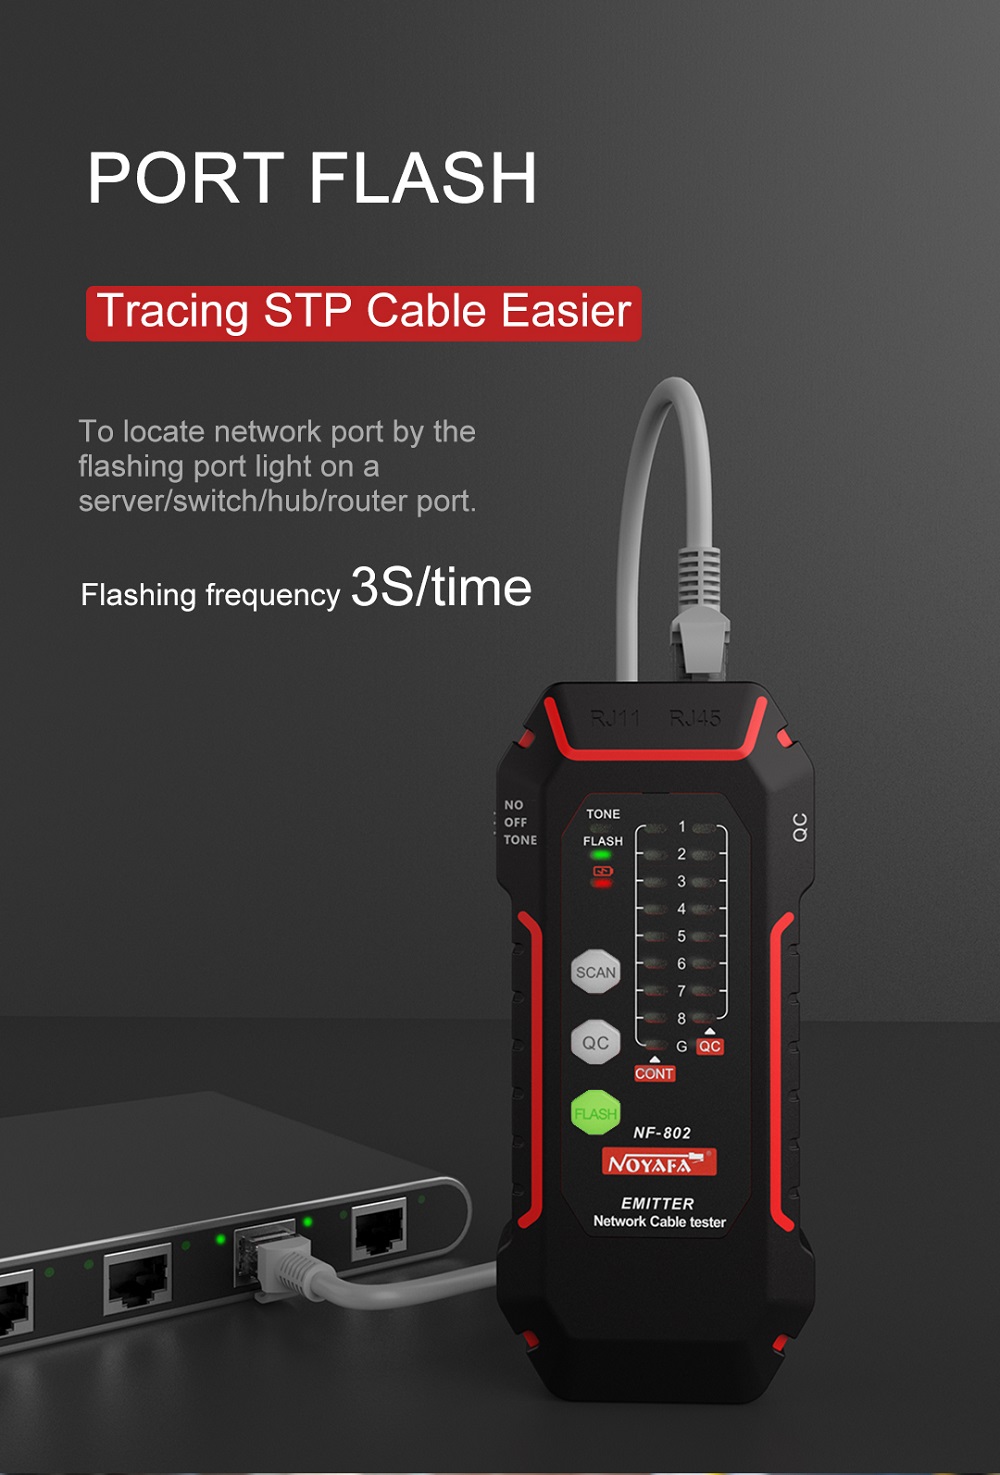 NF-802-Multi-function-Network-Cable-Tester-Tracker-RJ11-RJ45-CAT5-CAT6-LAN-Ethernet-Phone-Wire-Finde-1940386-7